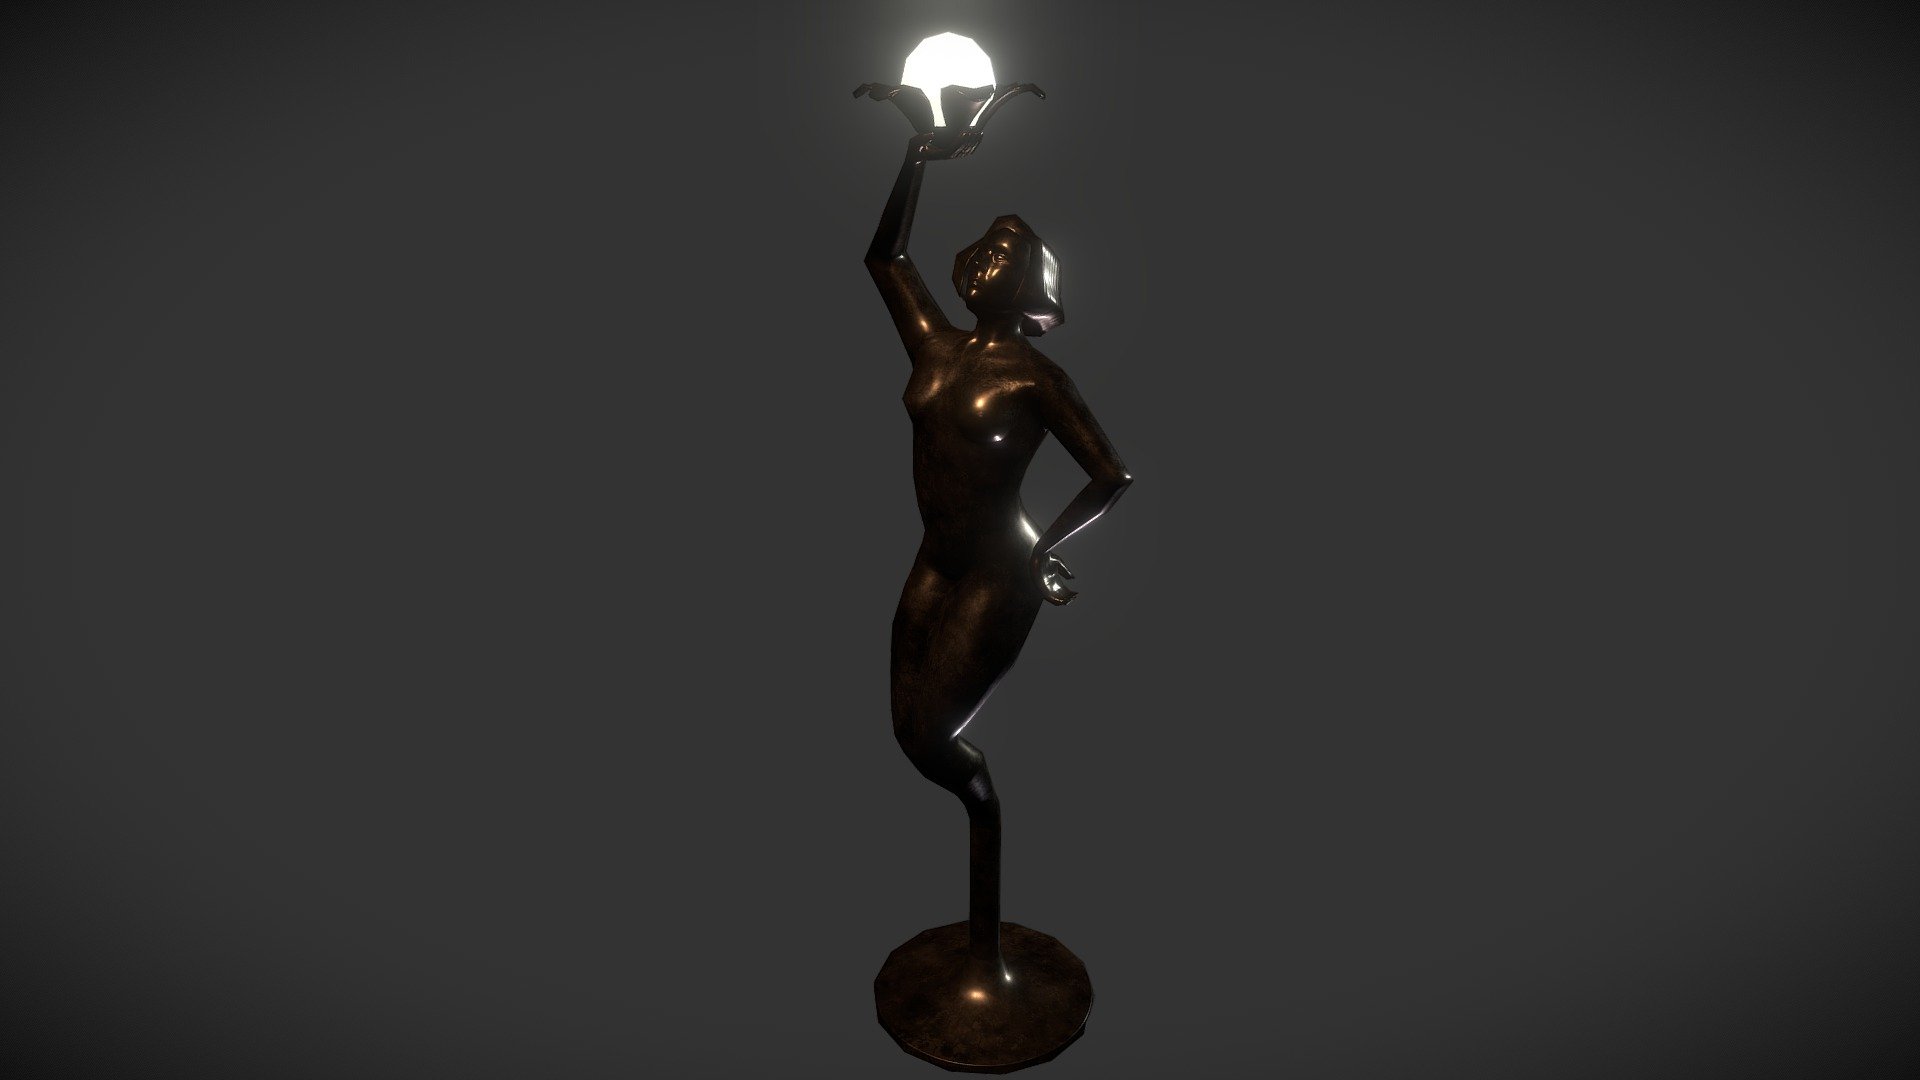 Another prop from the aforementioned canceled project.
I'm quite proud of this one, being the result of barely 5 months of modeling experience and one month into Blender.
It's a floor lamp with the shape of a woman.

Nothing too sexual....I hope 3d model